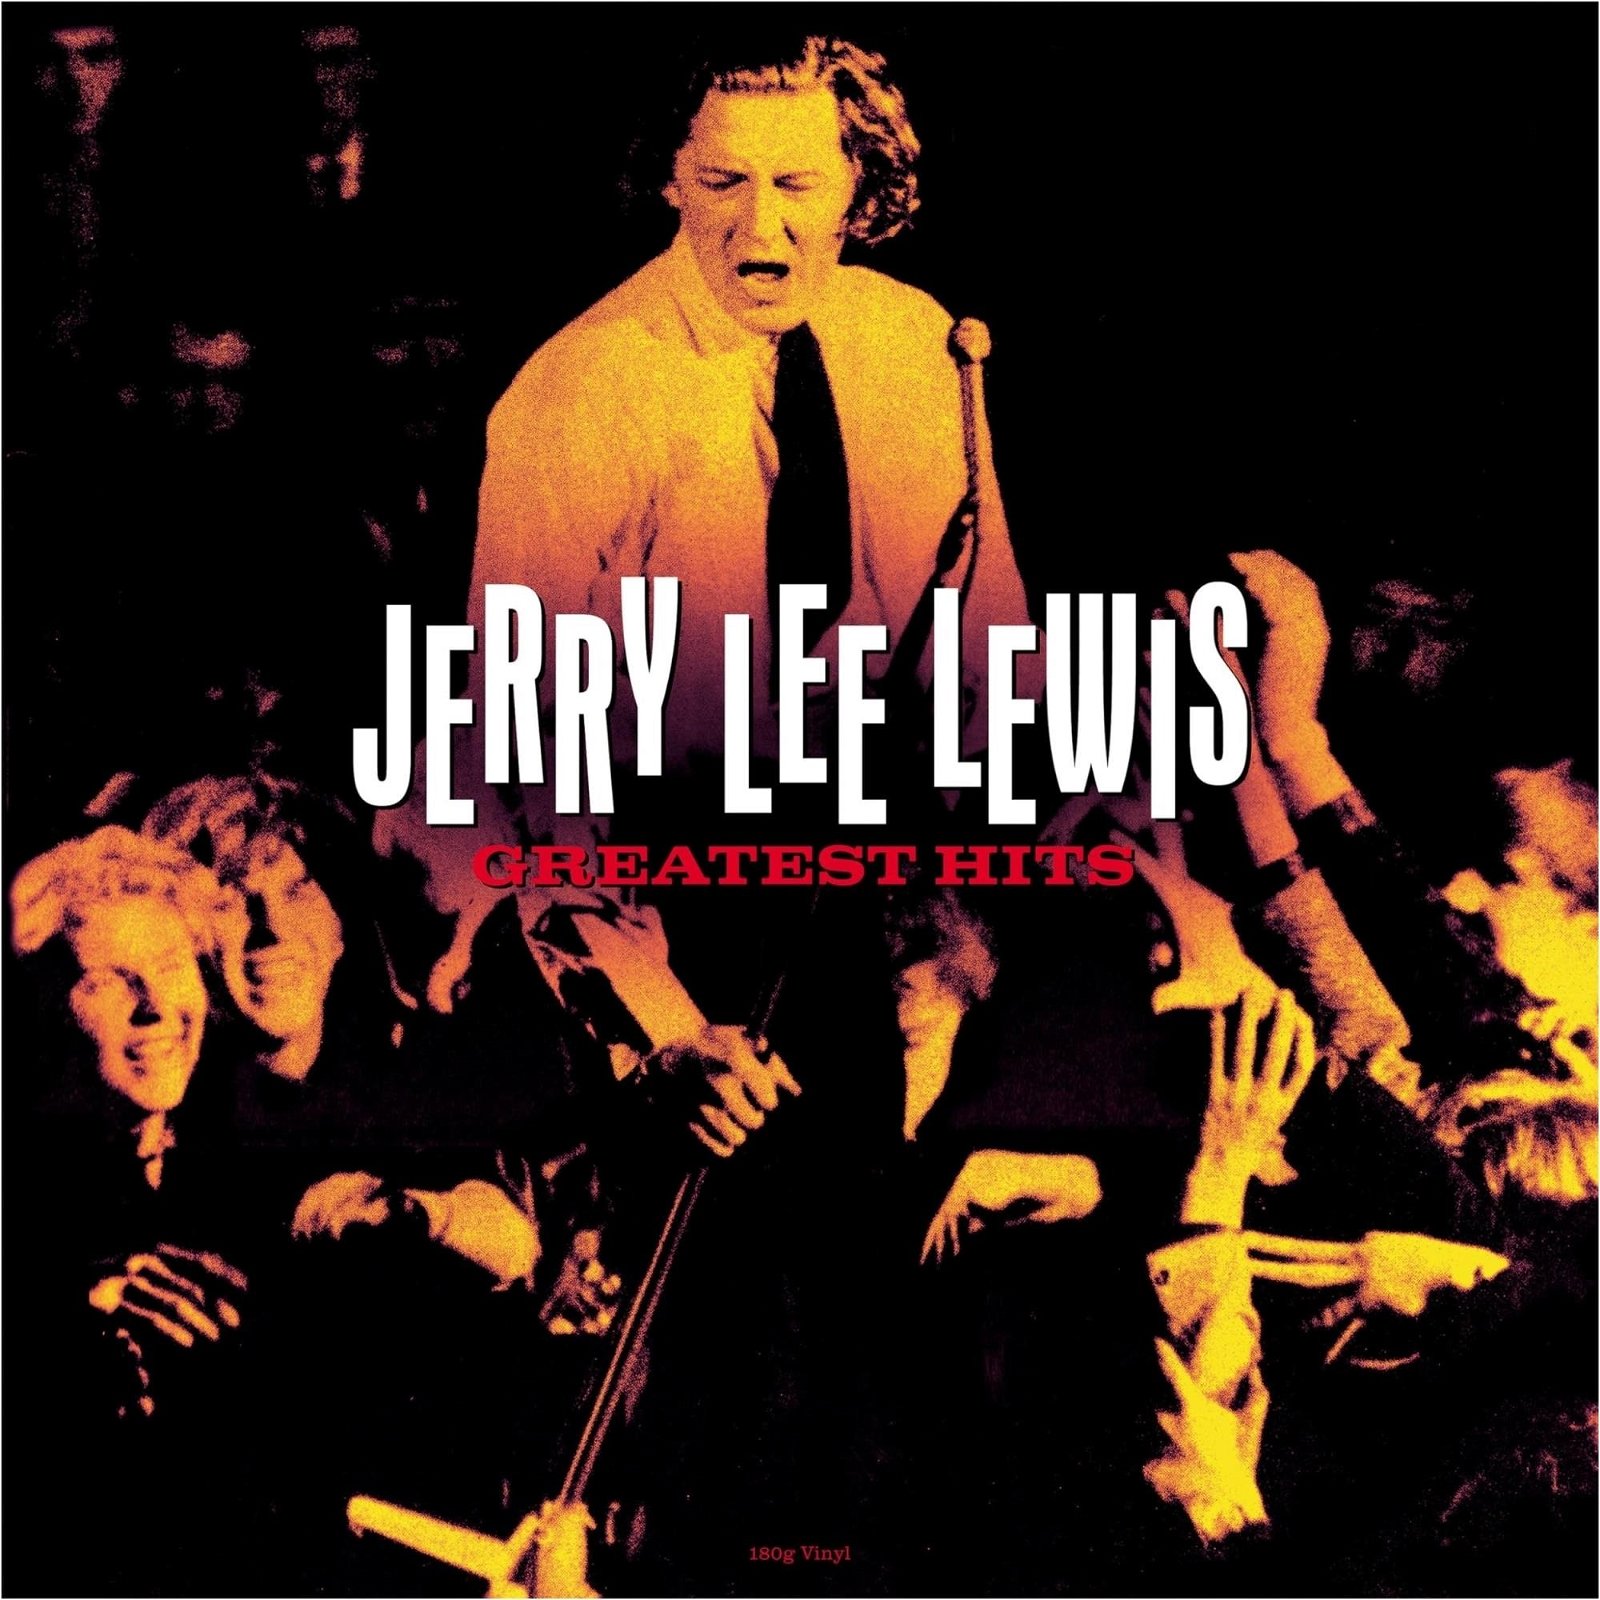 CD Shop - LEWIS, JERRY LEE GREATEST HITS